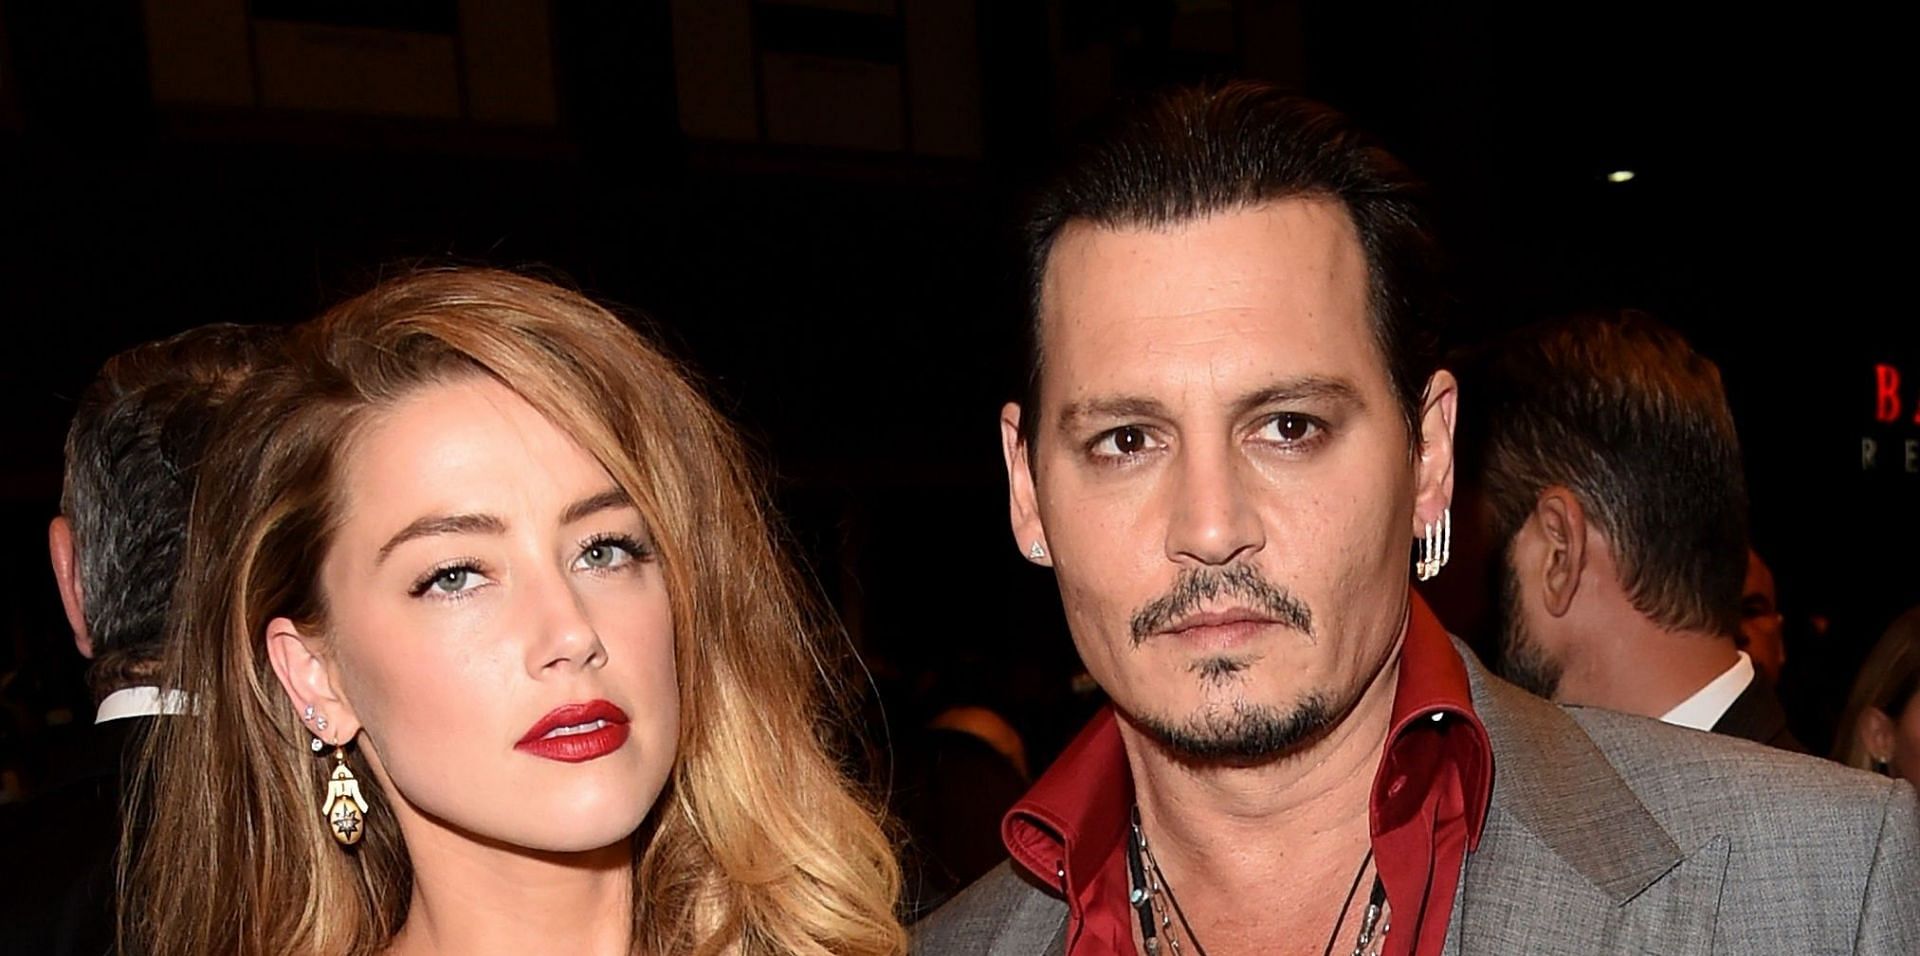 The Johnny Depp vs Amber Heard defamation trial is scheduled to resume next week (Image via Getty Images)